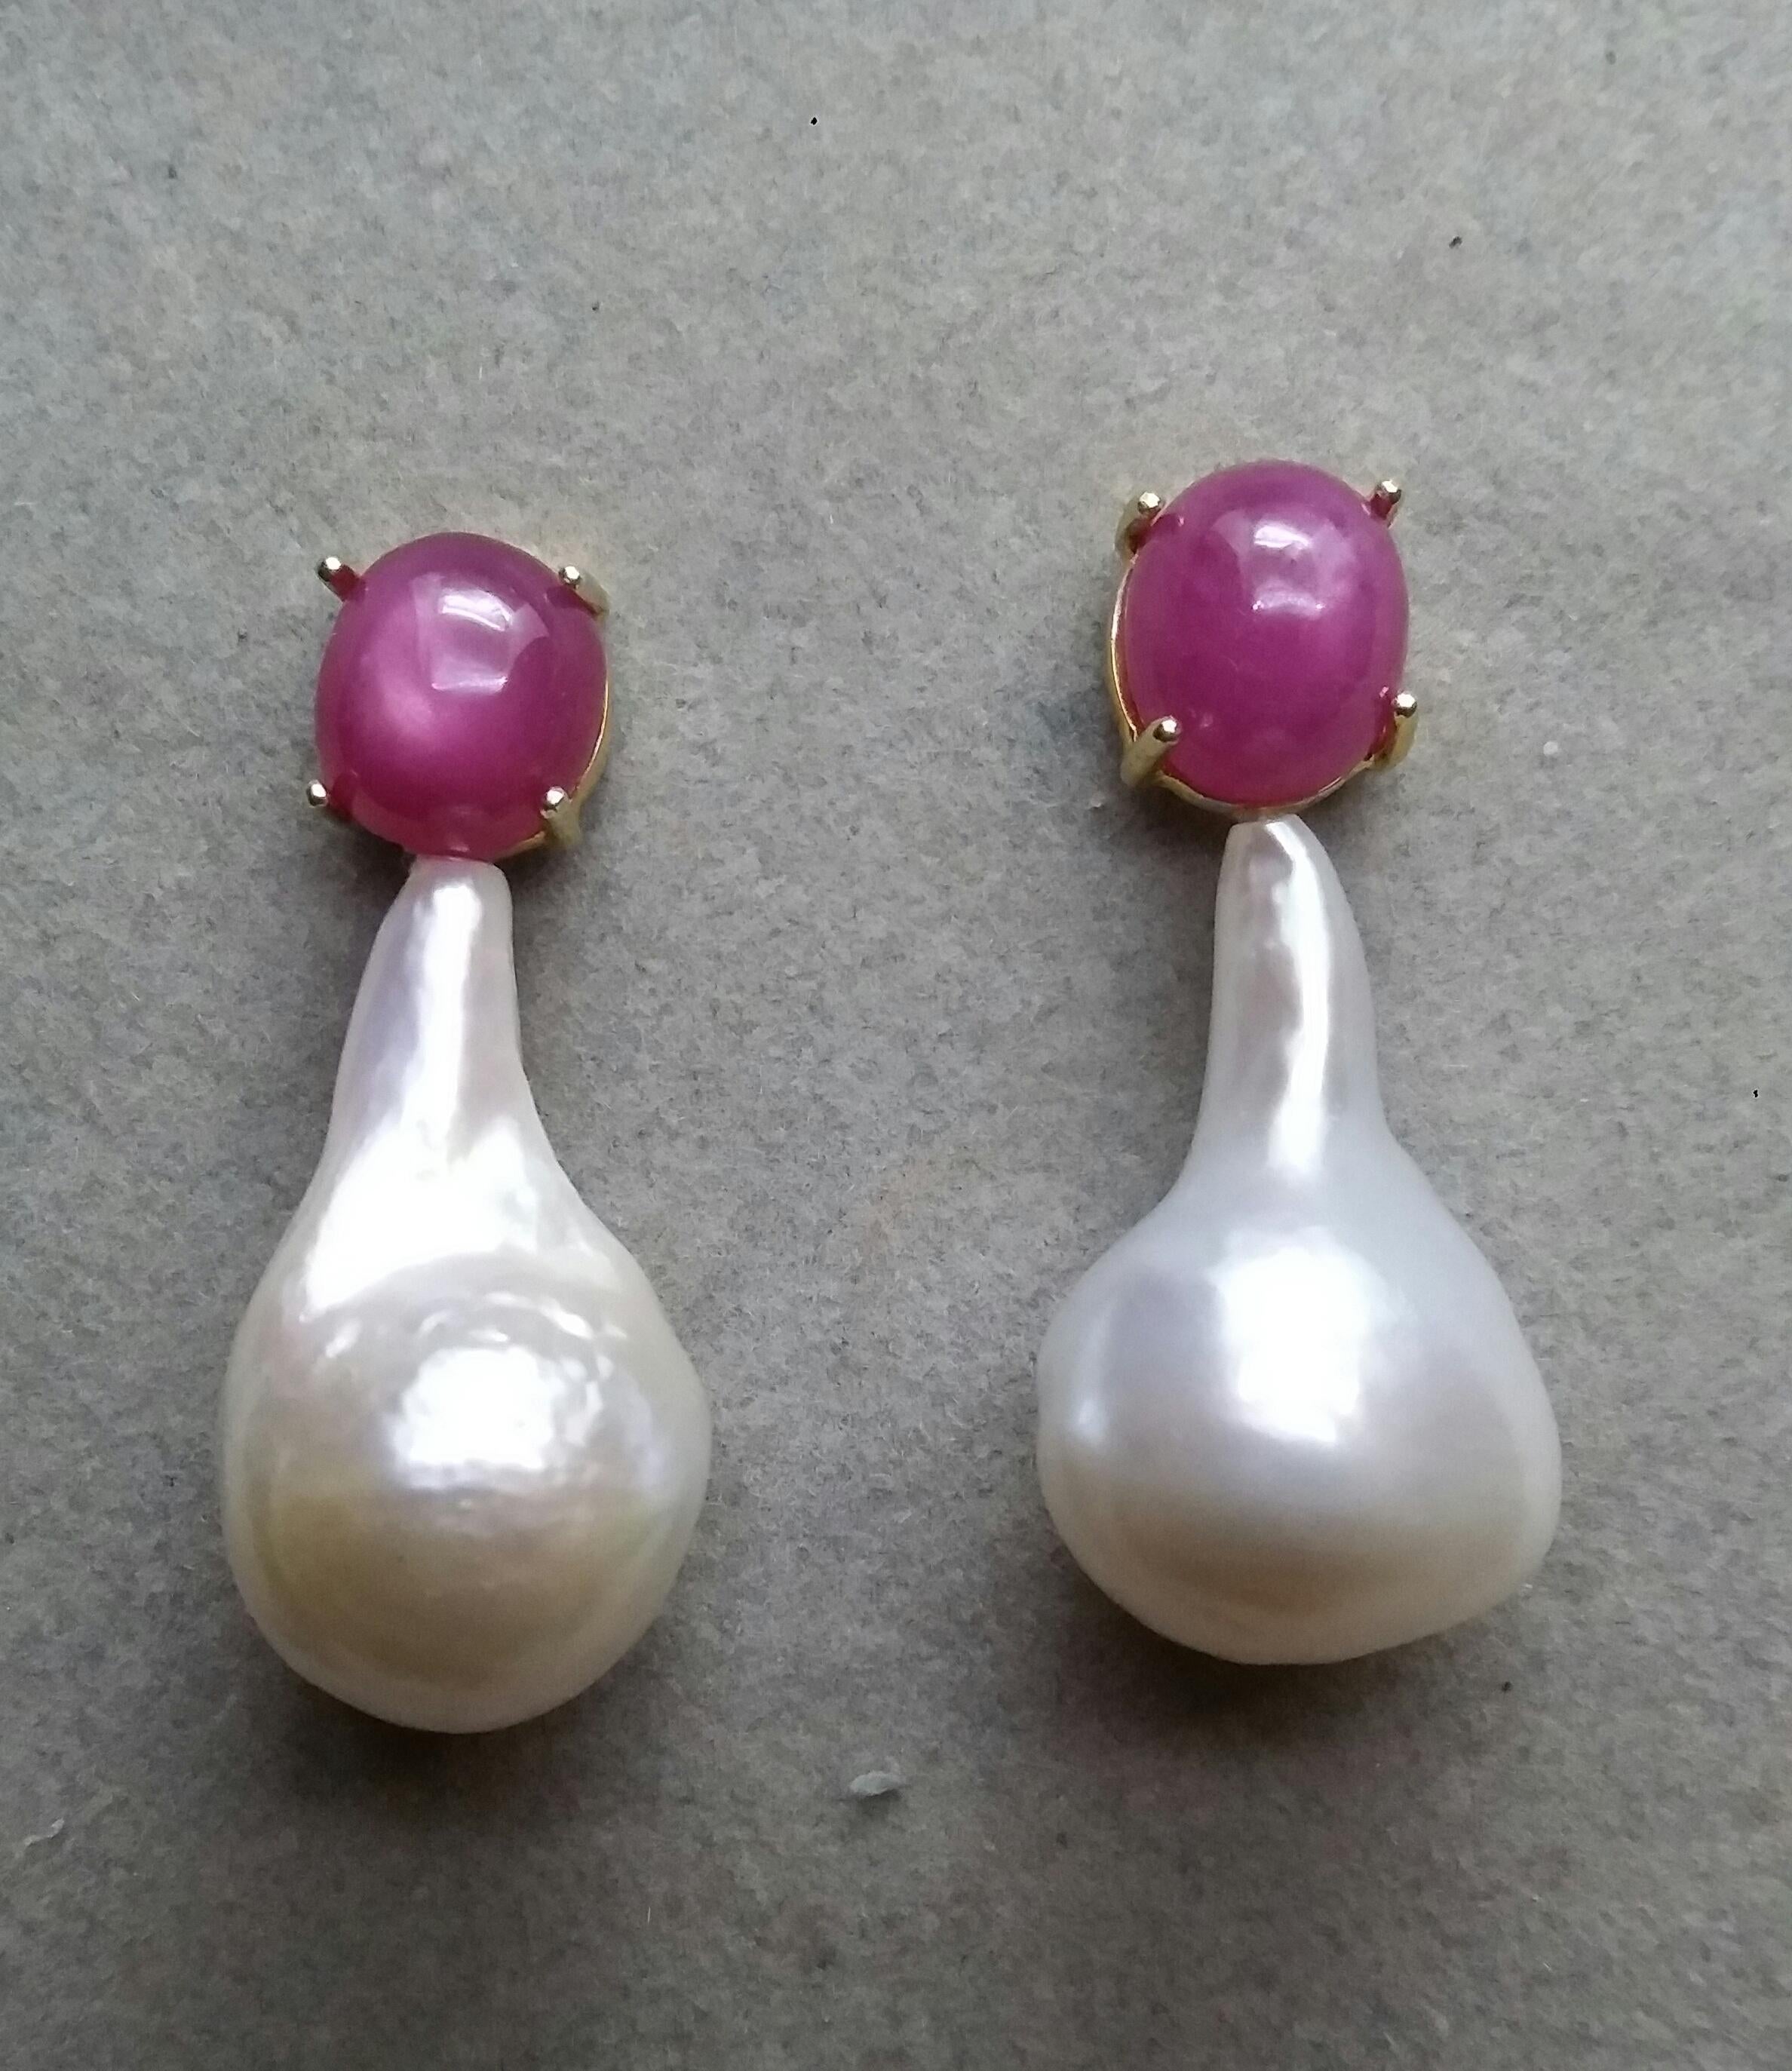 Simple chic stud earrings with a pair of Oval Ruby Cabs measuring 10 x 11 mm set in solid 14 Kt. yellow gold on the top and in the lower parts 2 unusual shape , big size and excellent luster White Pear  Baroque Pearls measuring 16 mm x 28 mm and